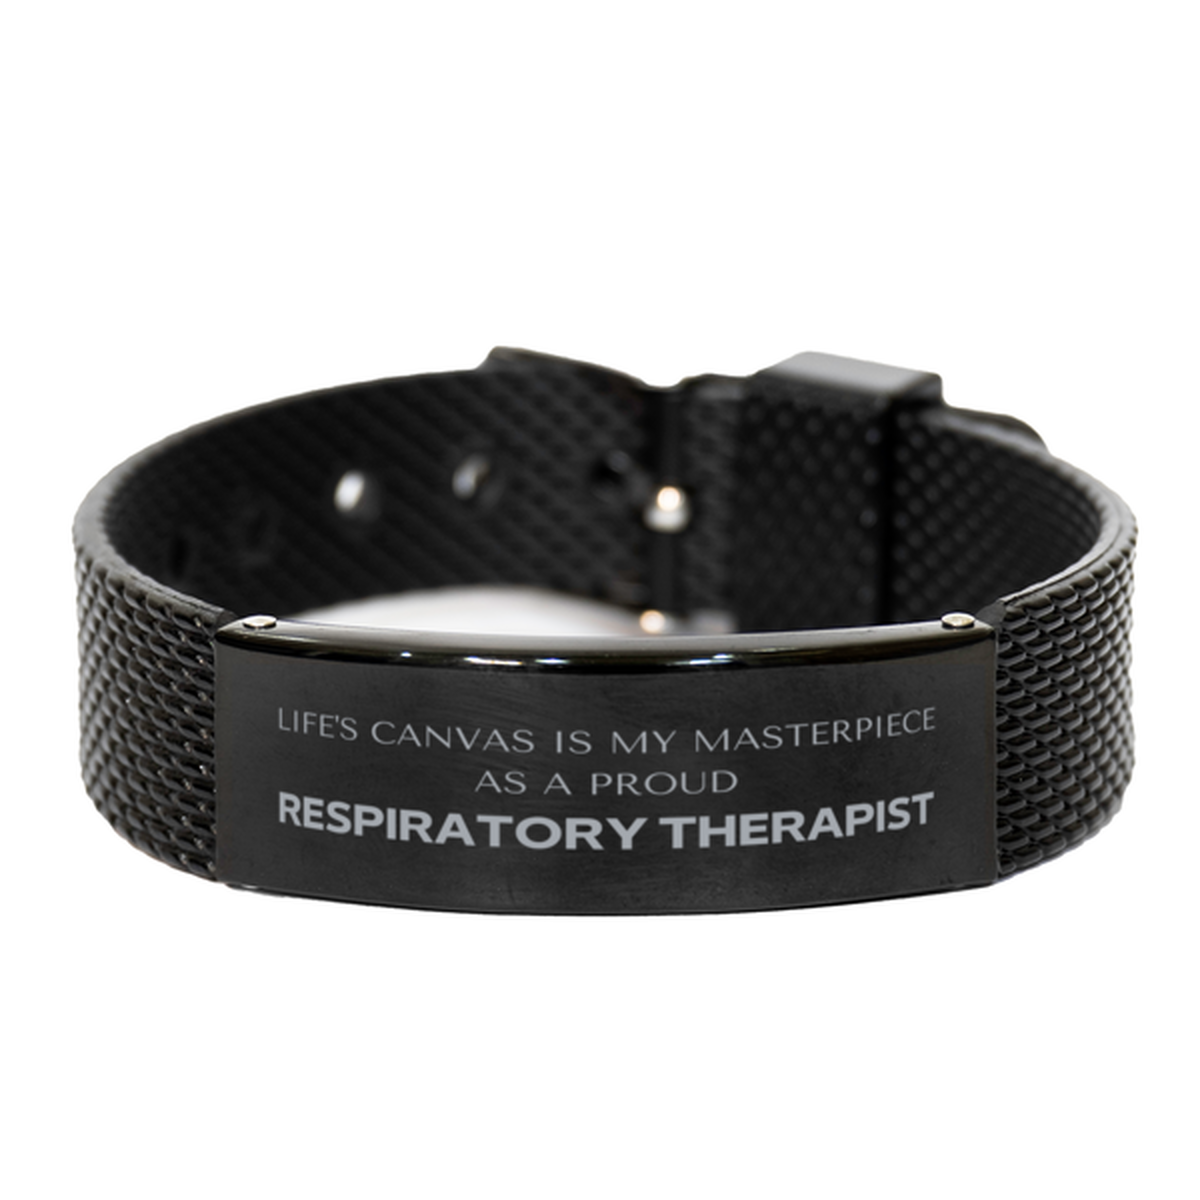 Proud Respiratory Therapist Gifts, Life's canvas is my masterpiece, Epic Birthday Christmas Unique Black Shark Mesh Bracelet For Respiratory Therapist, Coworkers, Men, Women, Friends